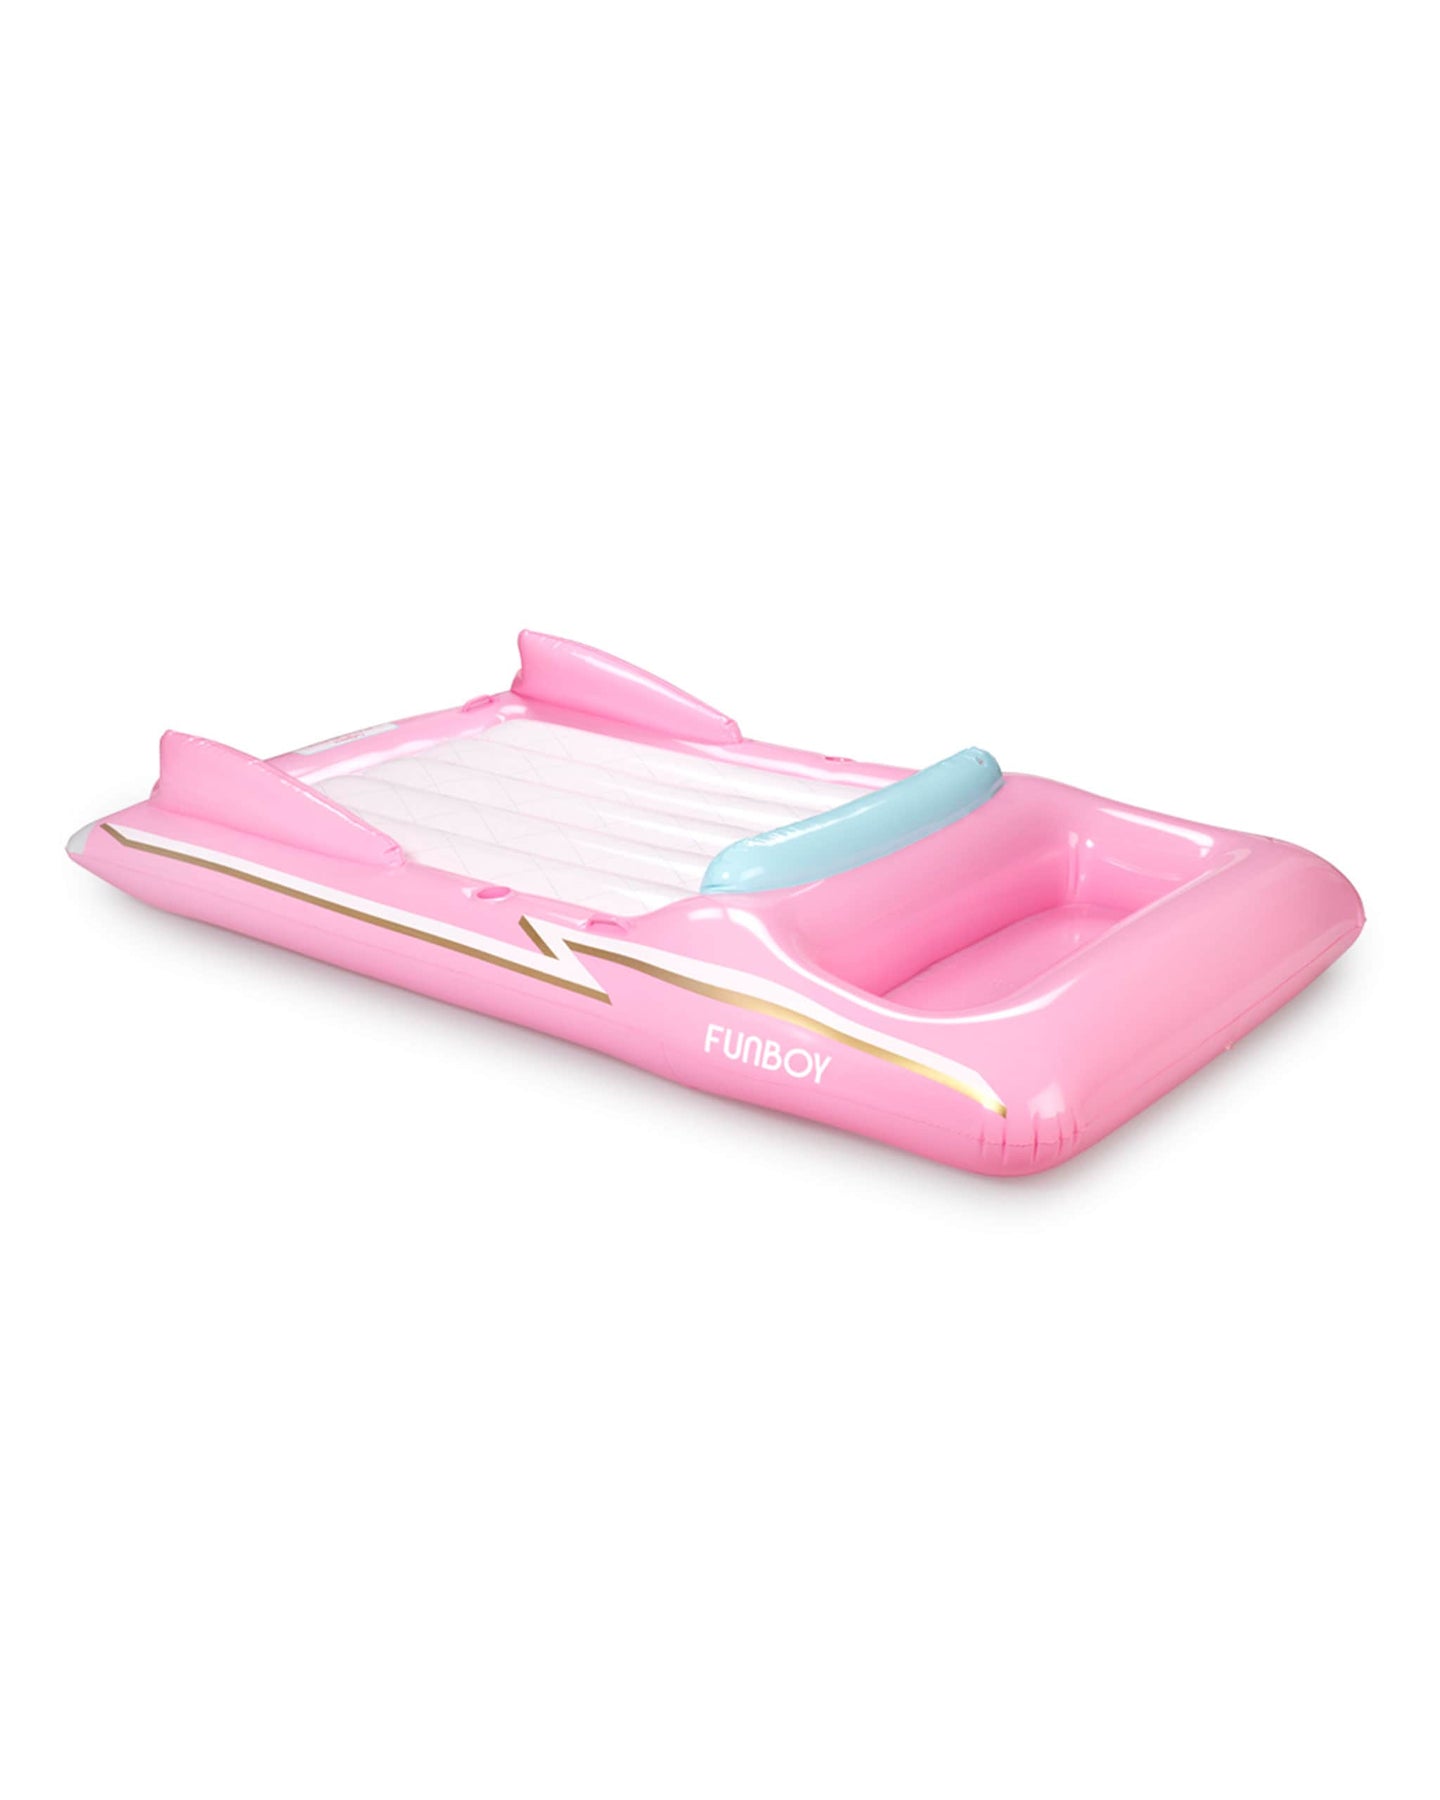 FUNBOY Pink Car Convertible Pool Float